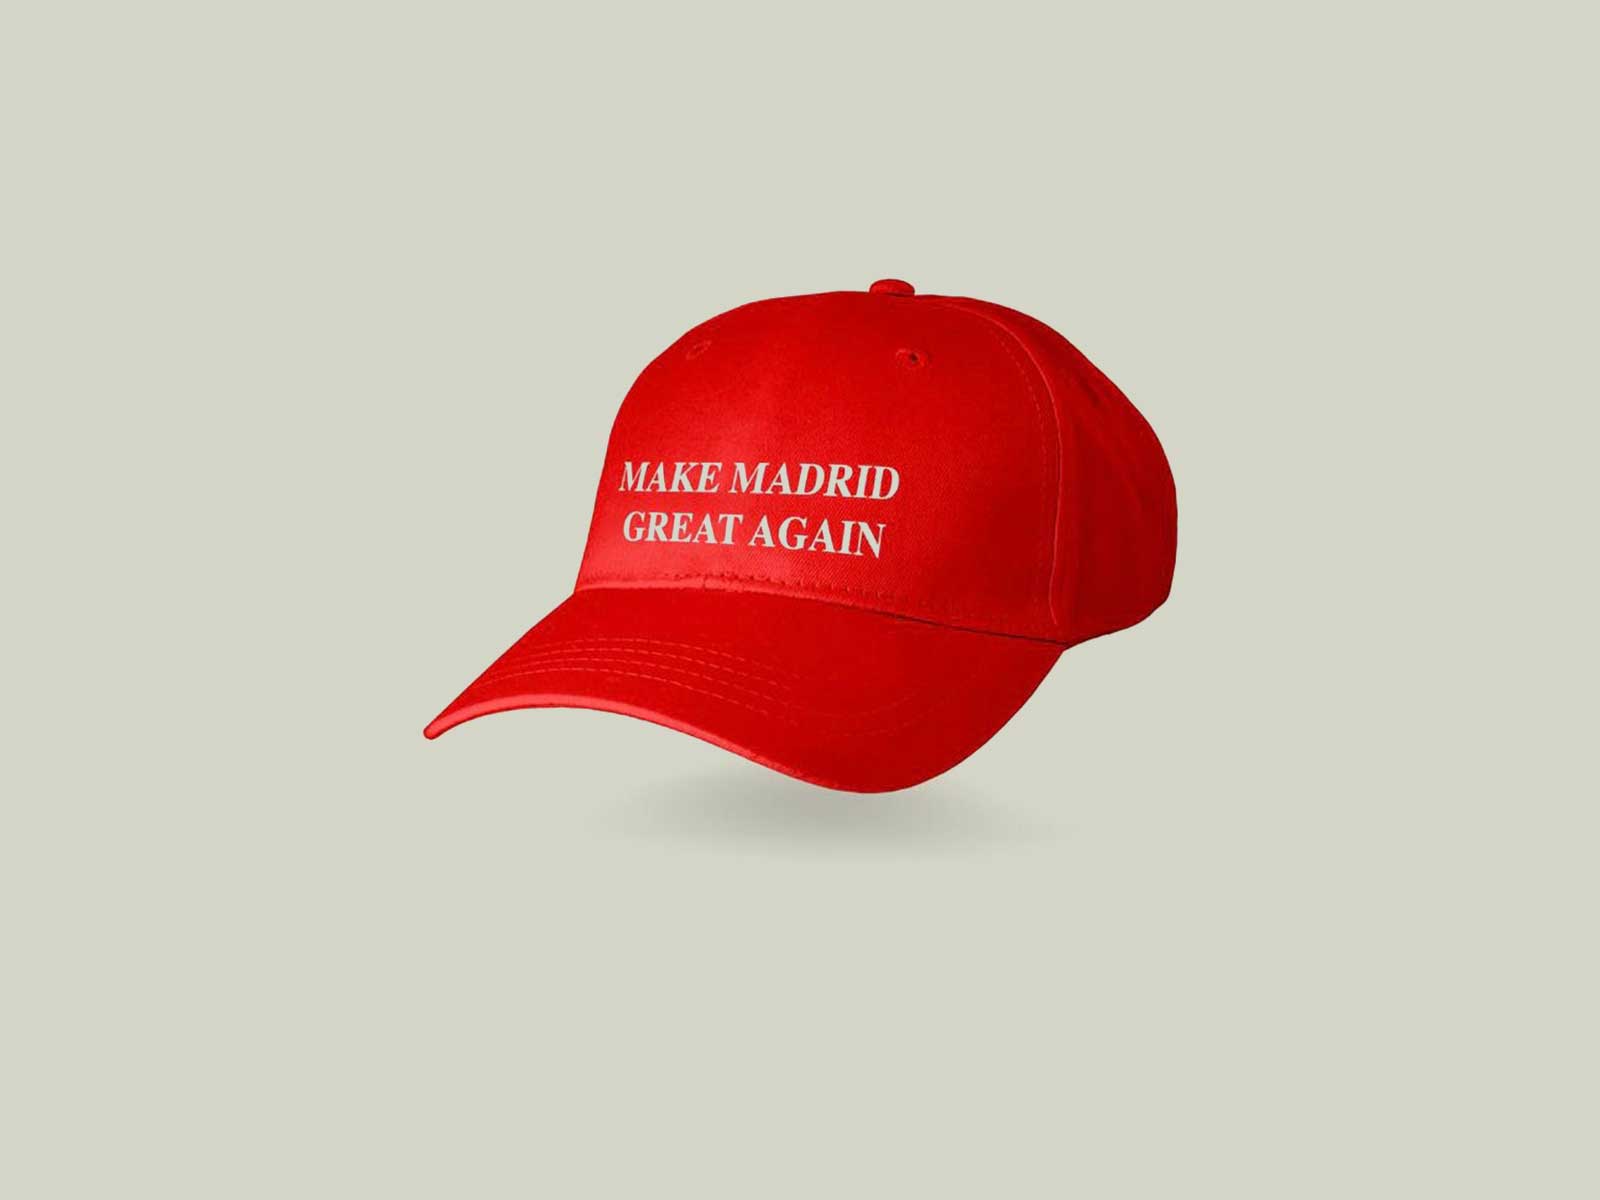 You can now buy the cap that has invaded the social media